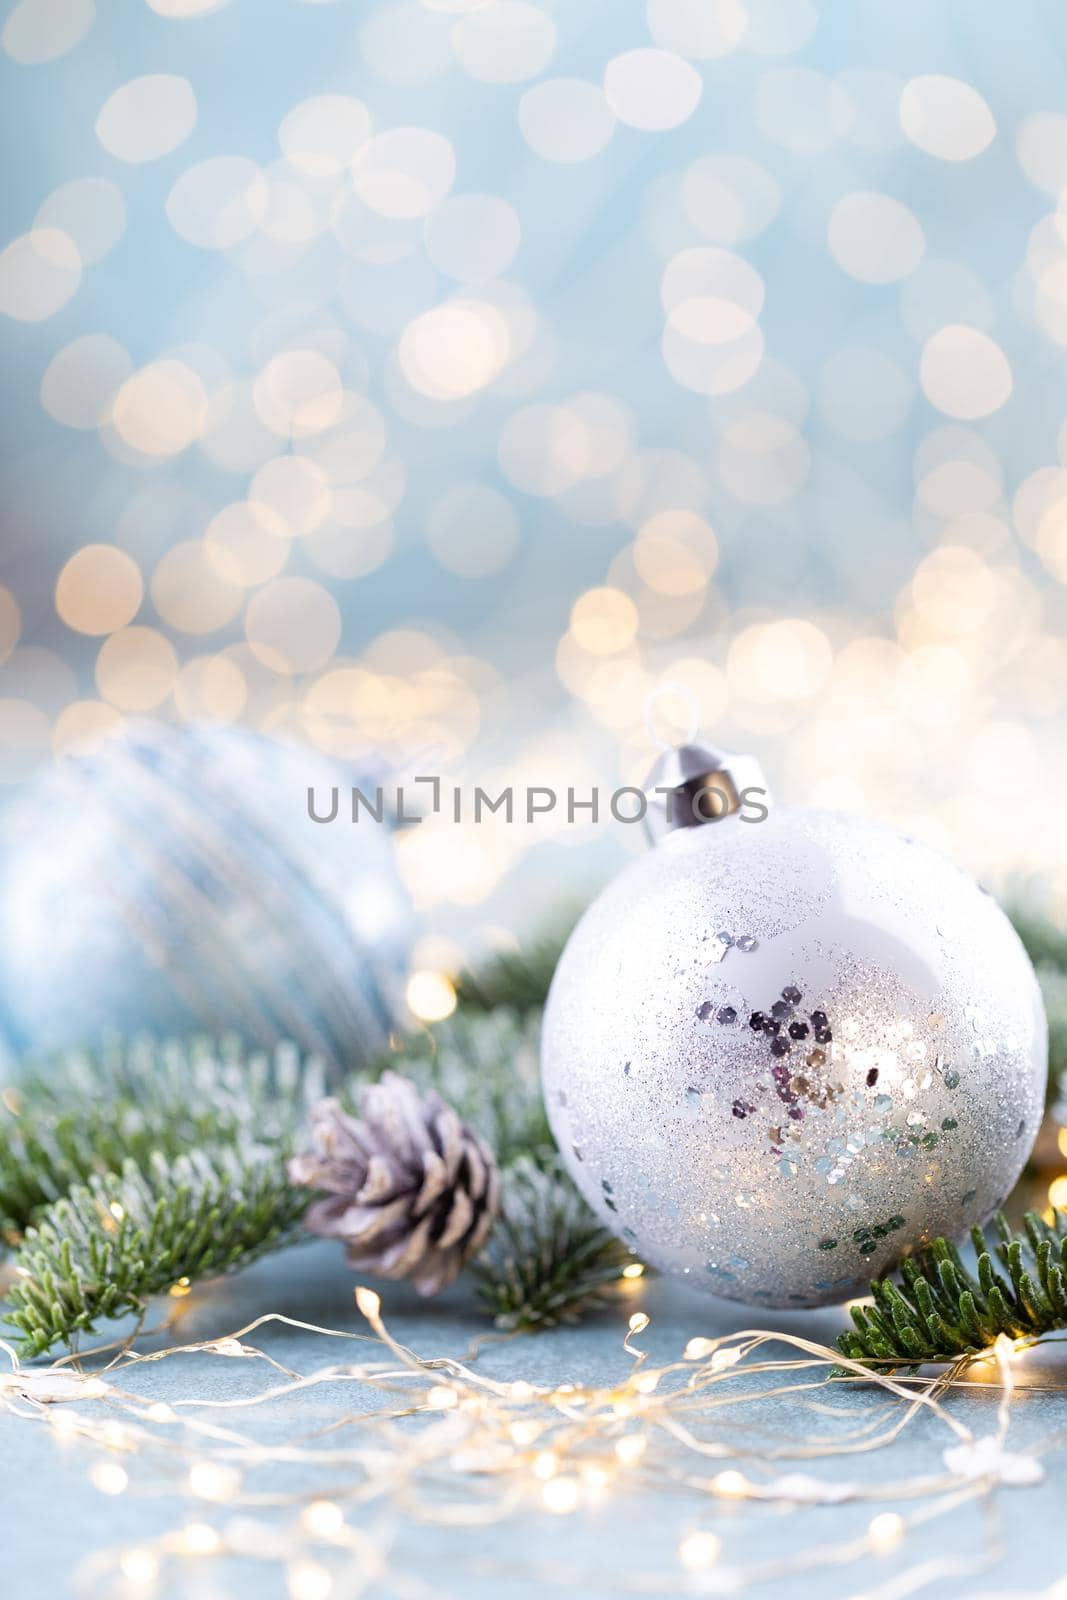 Christmas spruce with ball and blurred shiny lights. by gitusik